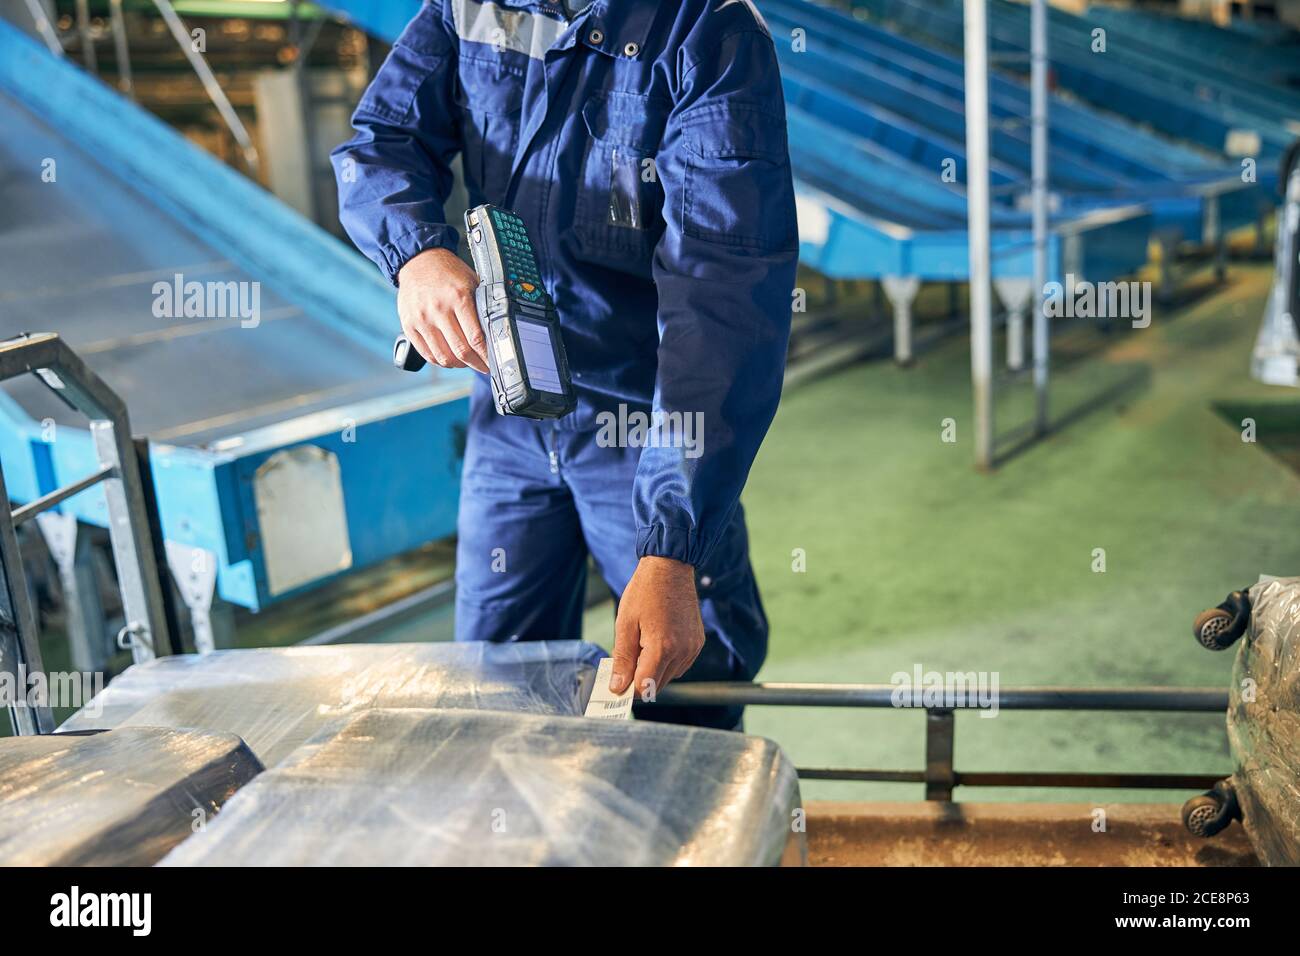 Baggage department worker scanning a luggage tag Stock Photo